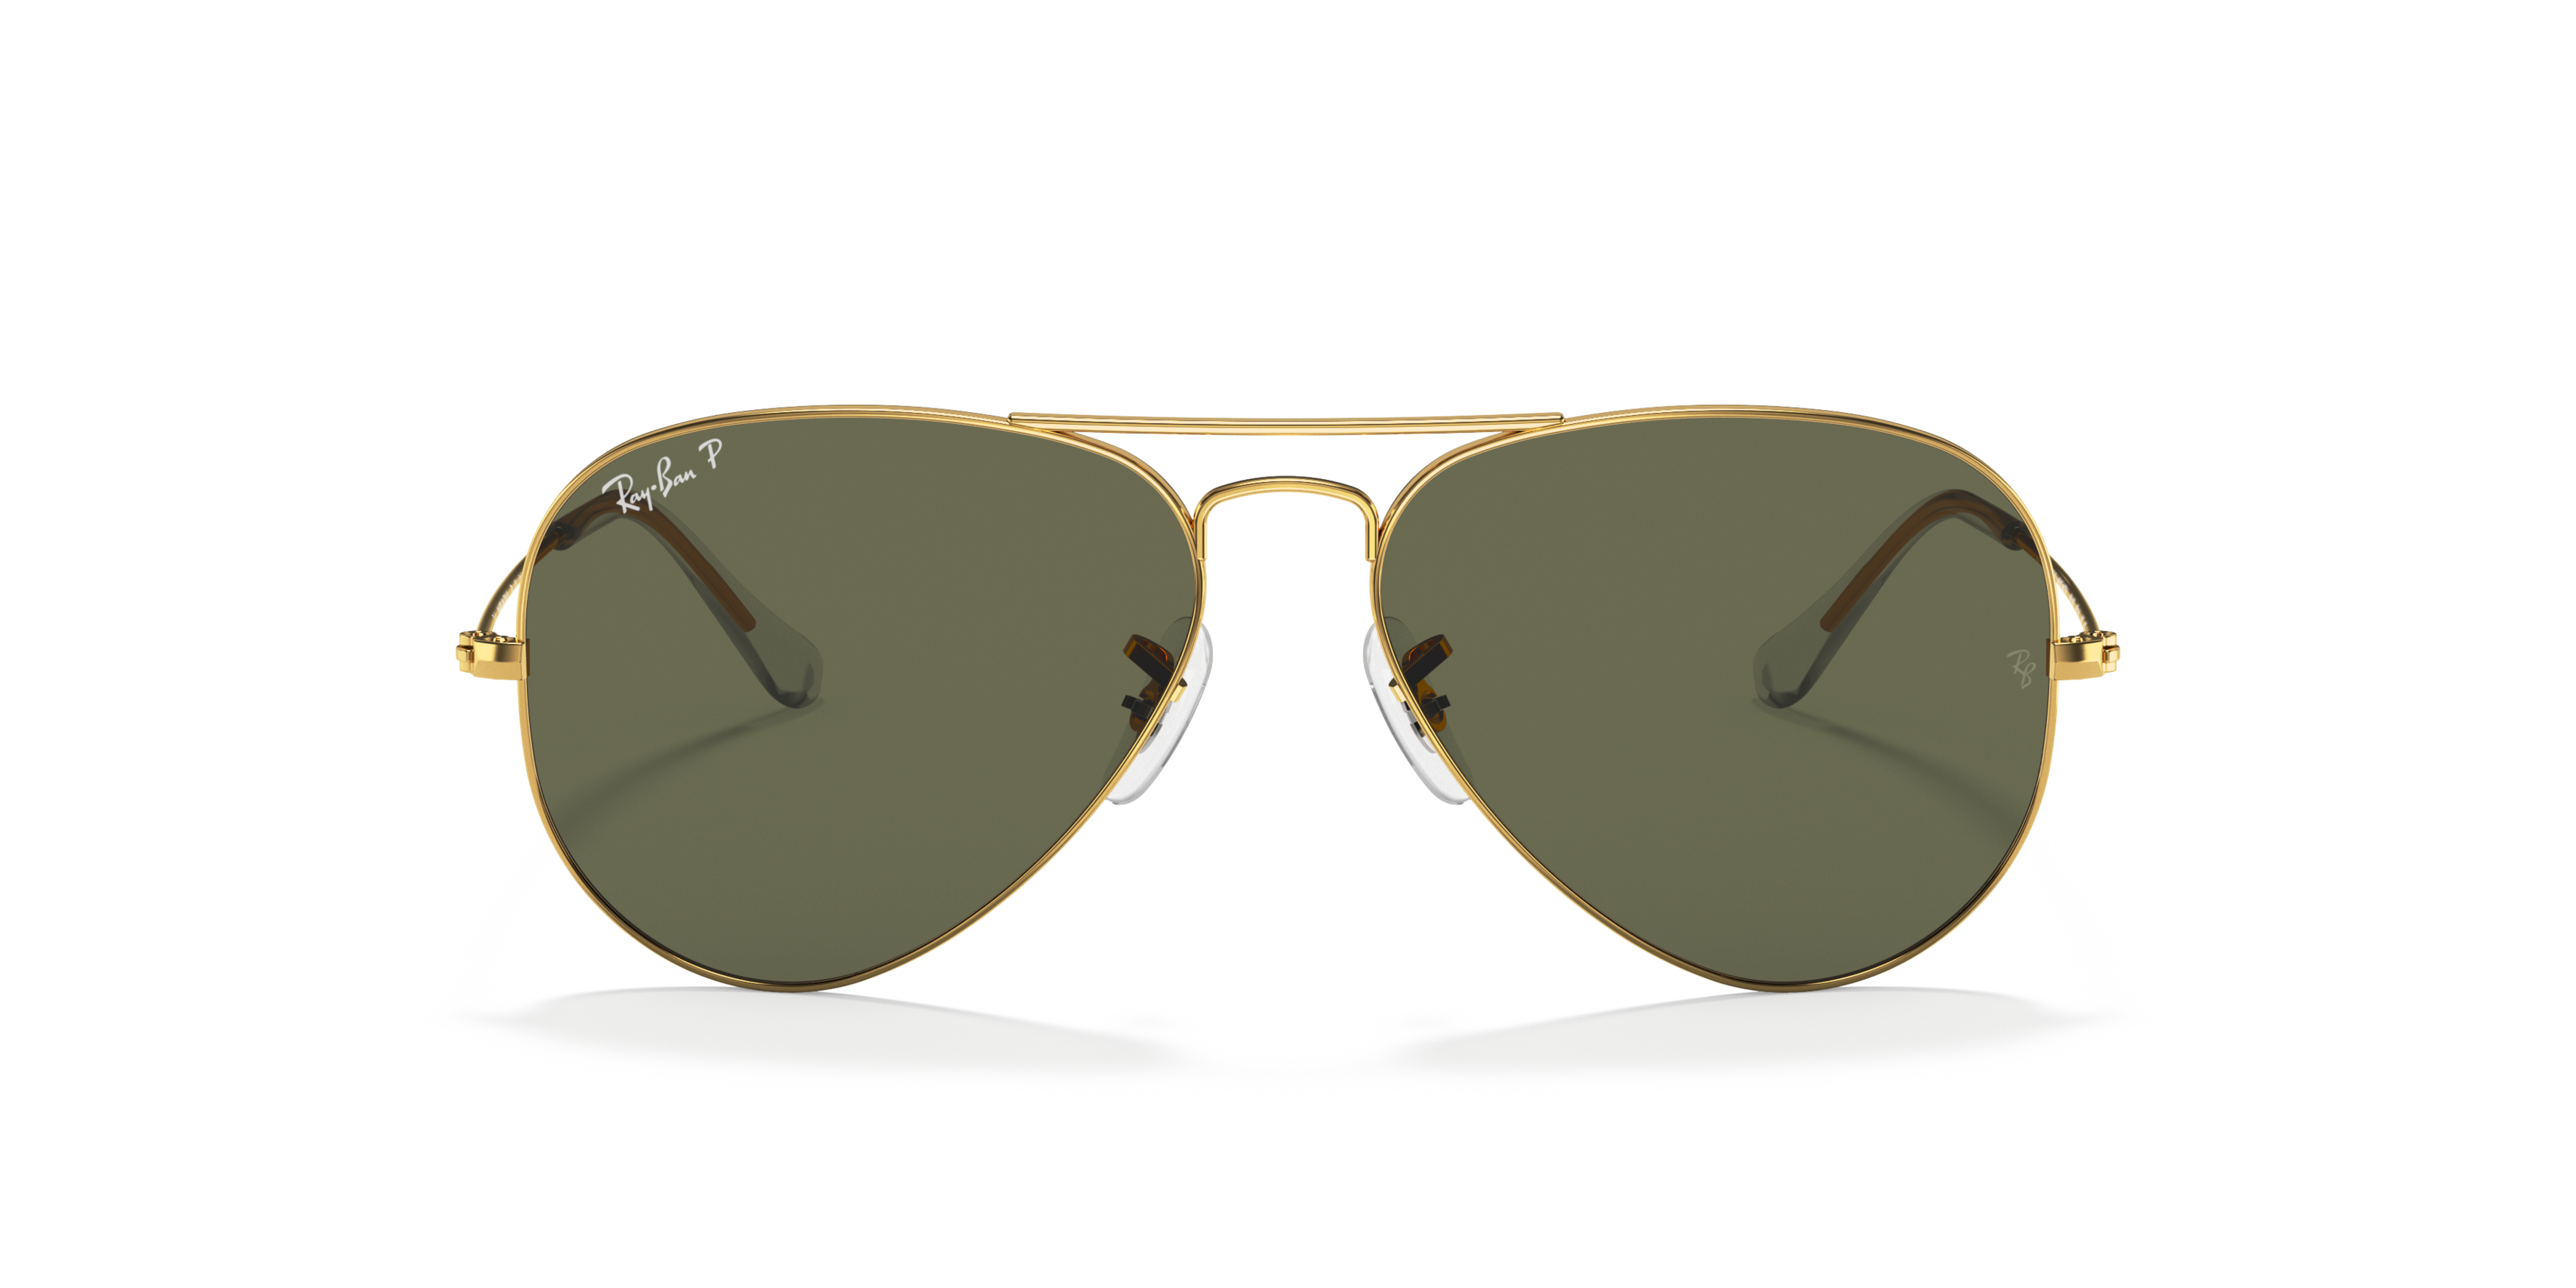 [products.image.front] Ray-Ban Aviator Classic Polarizado RB3025 001/58 62